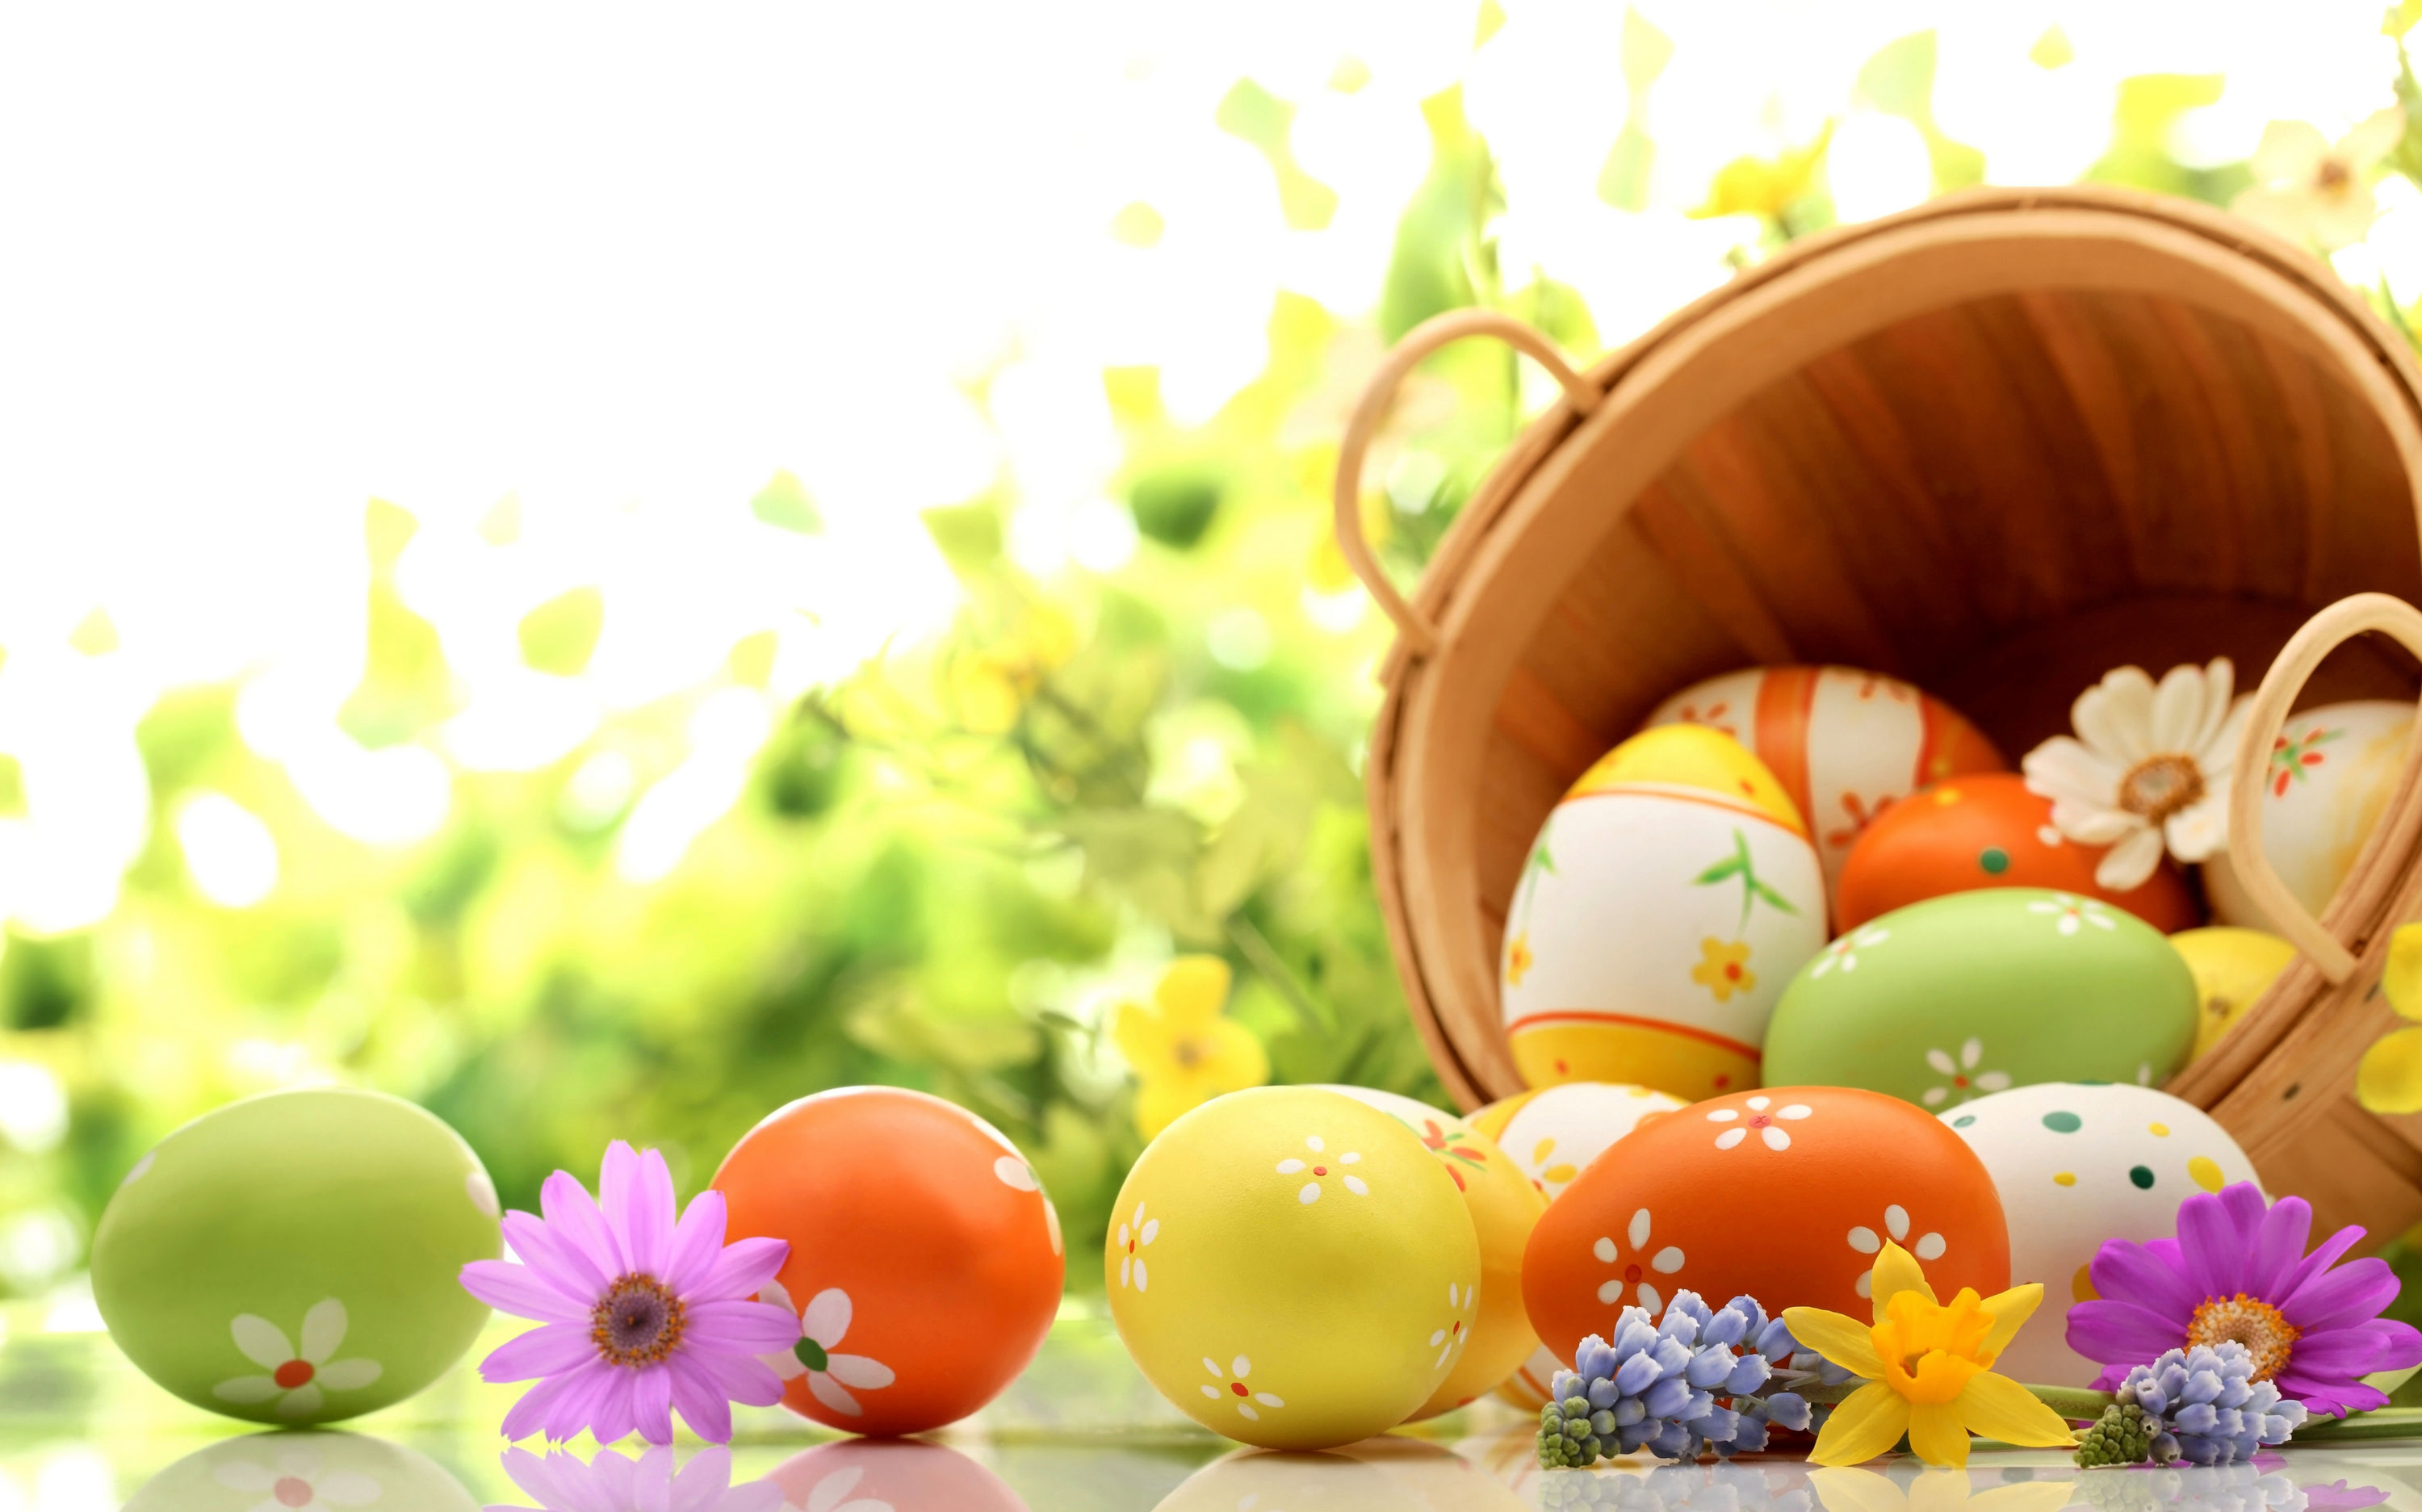 Easter eggs vector seamless pattern wallpaper background isolated • wall  stickers chick, egg, april | myloview.com